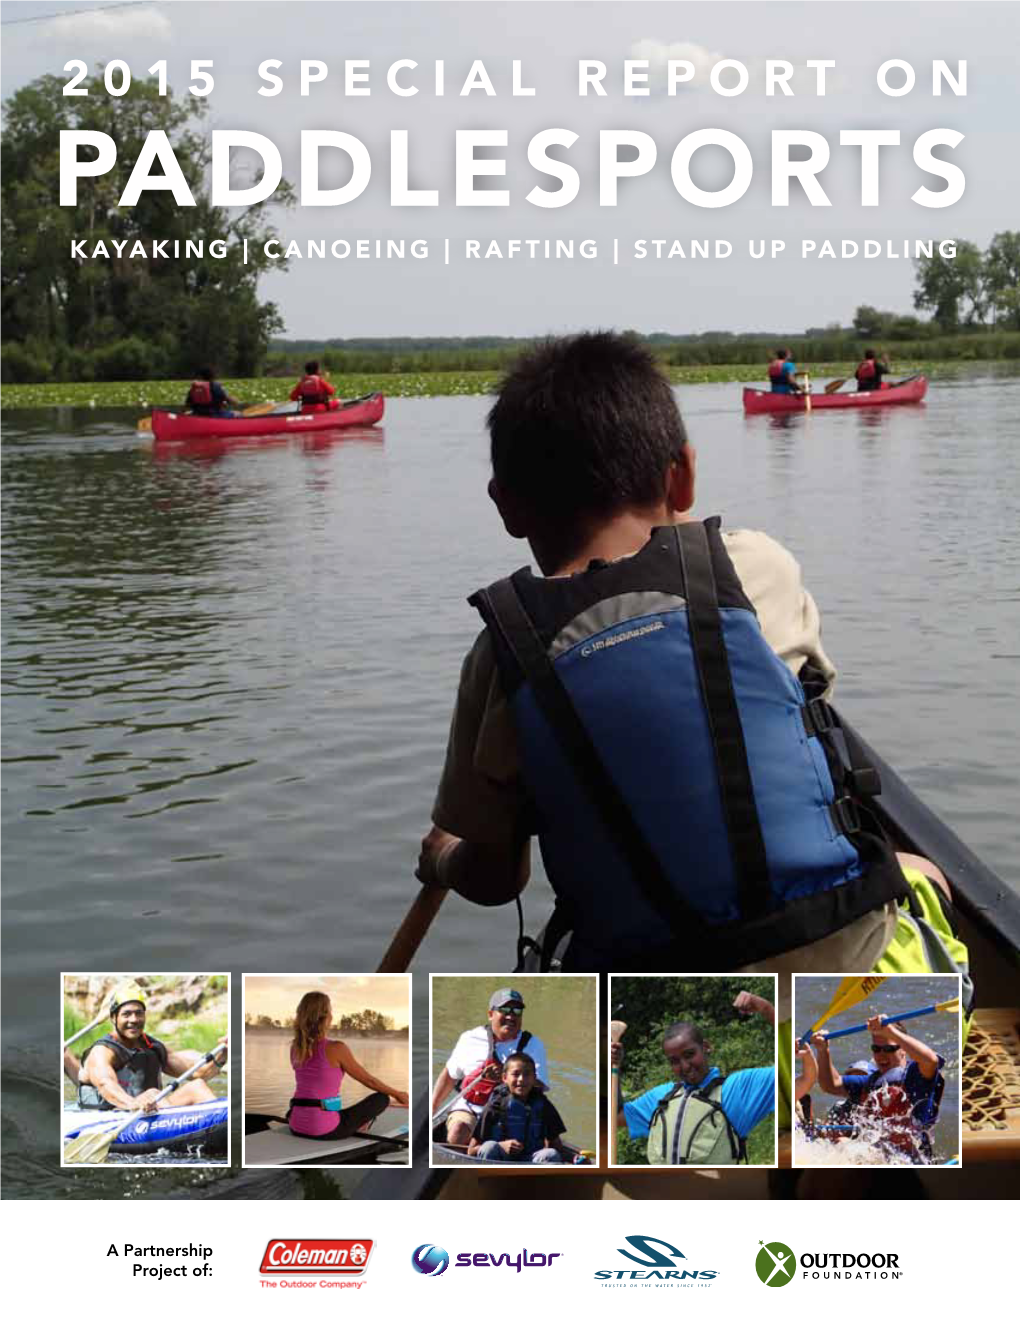 2015 Special Report on Paddlesports Kayaking | Canoeing | Rafting | Stand up Paddling